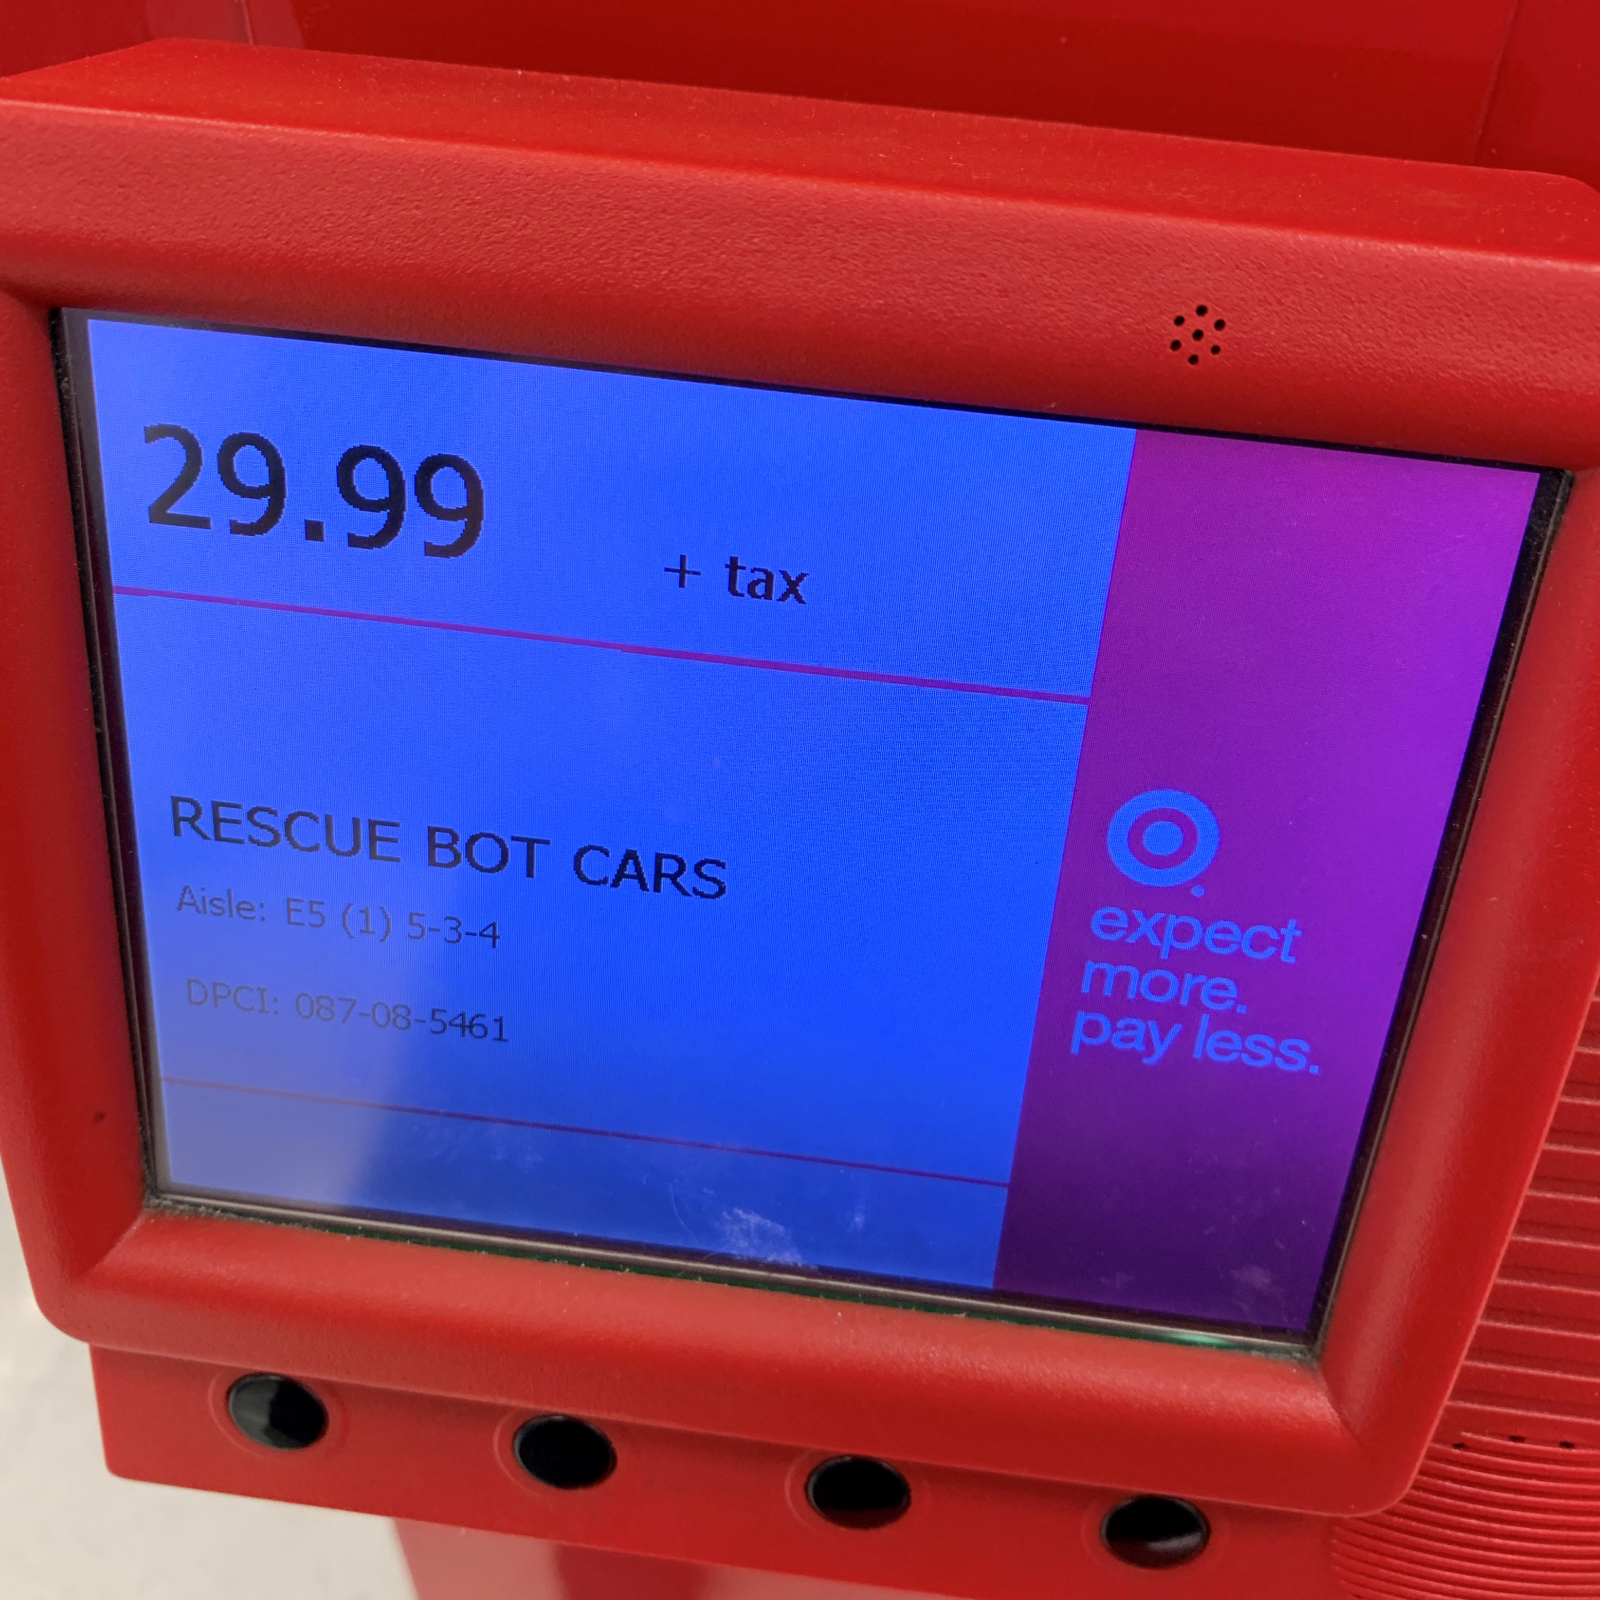 Transformers News: Transformers Rescue Bots Academy Bumblebee Vs Chase RC Bumper Cars Spotted at US Target